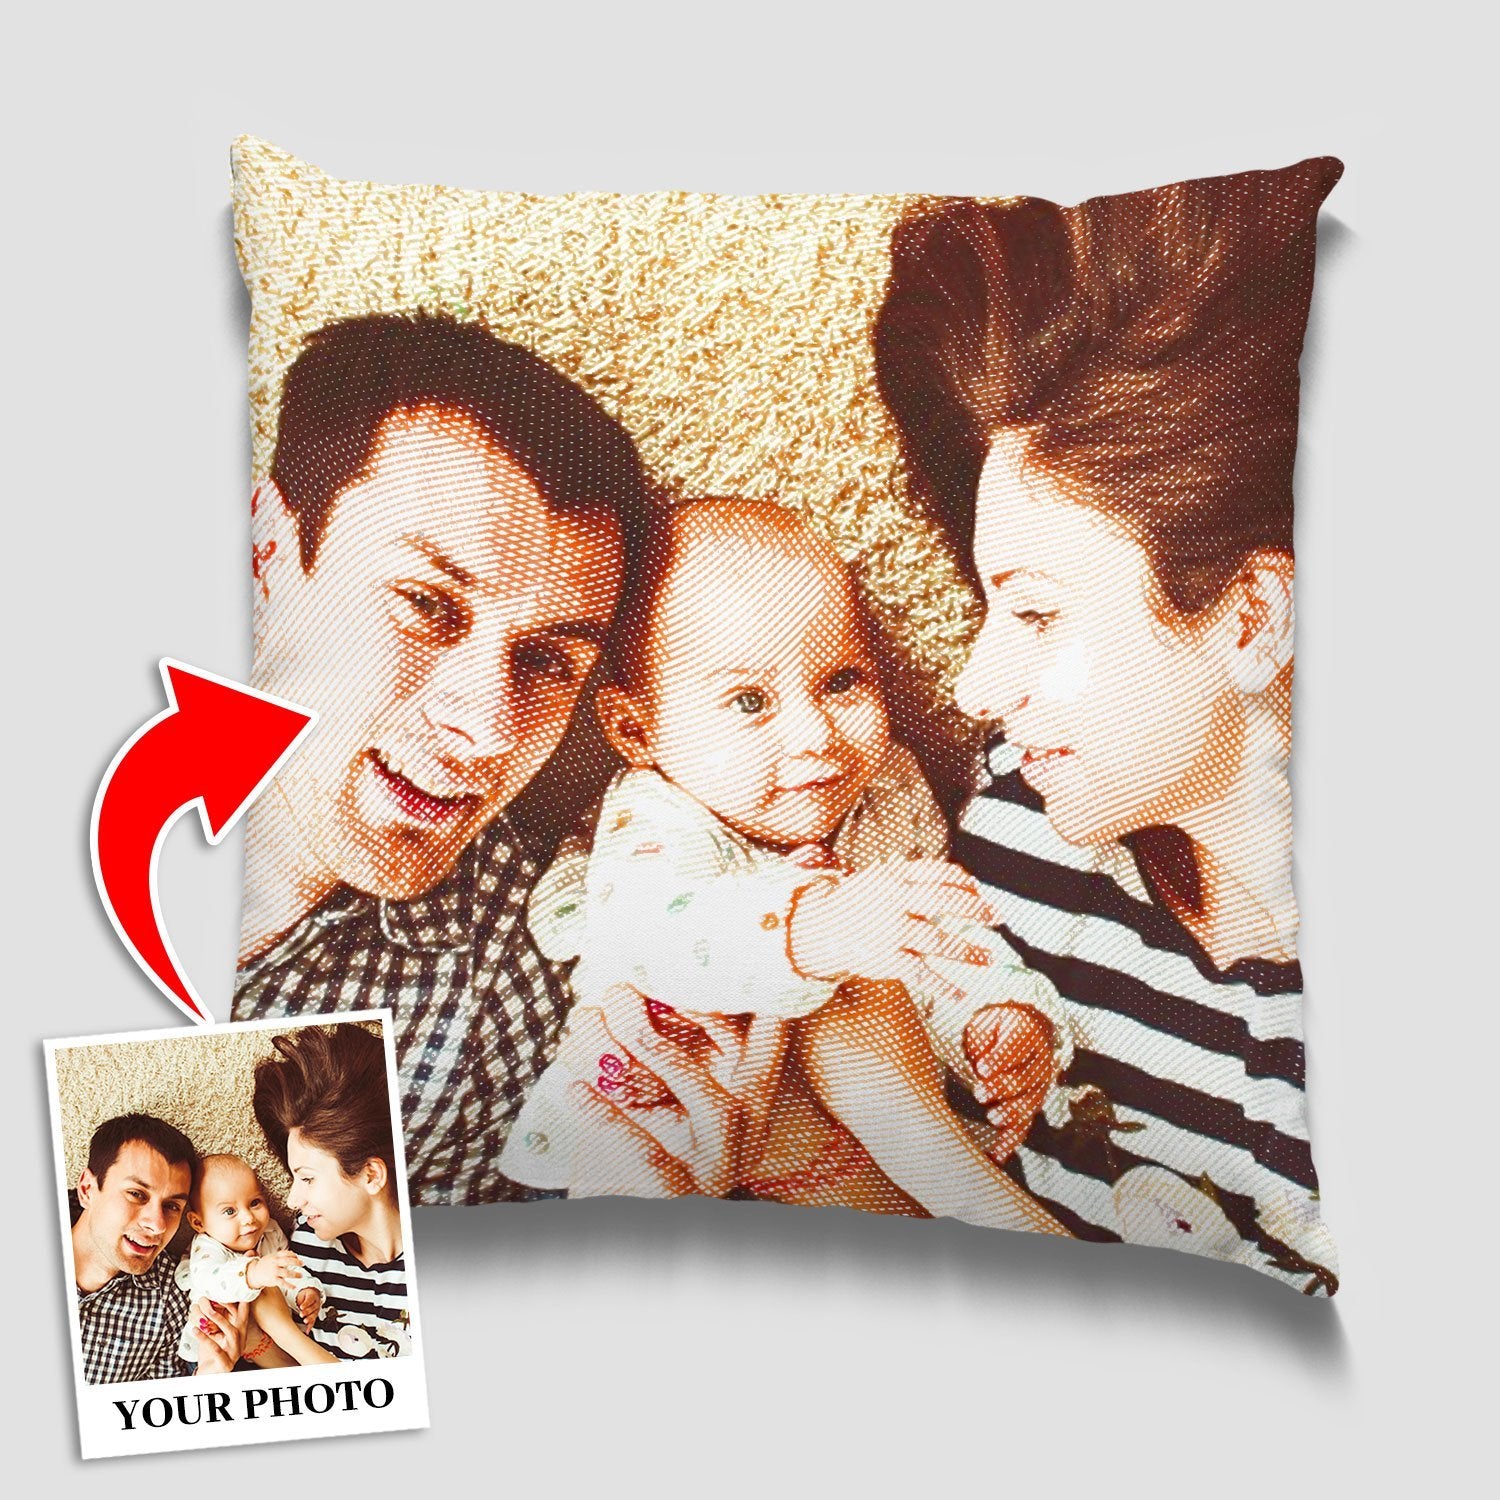 Custom Portrait From Photo, Painting, Pillow